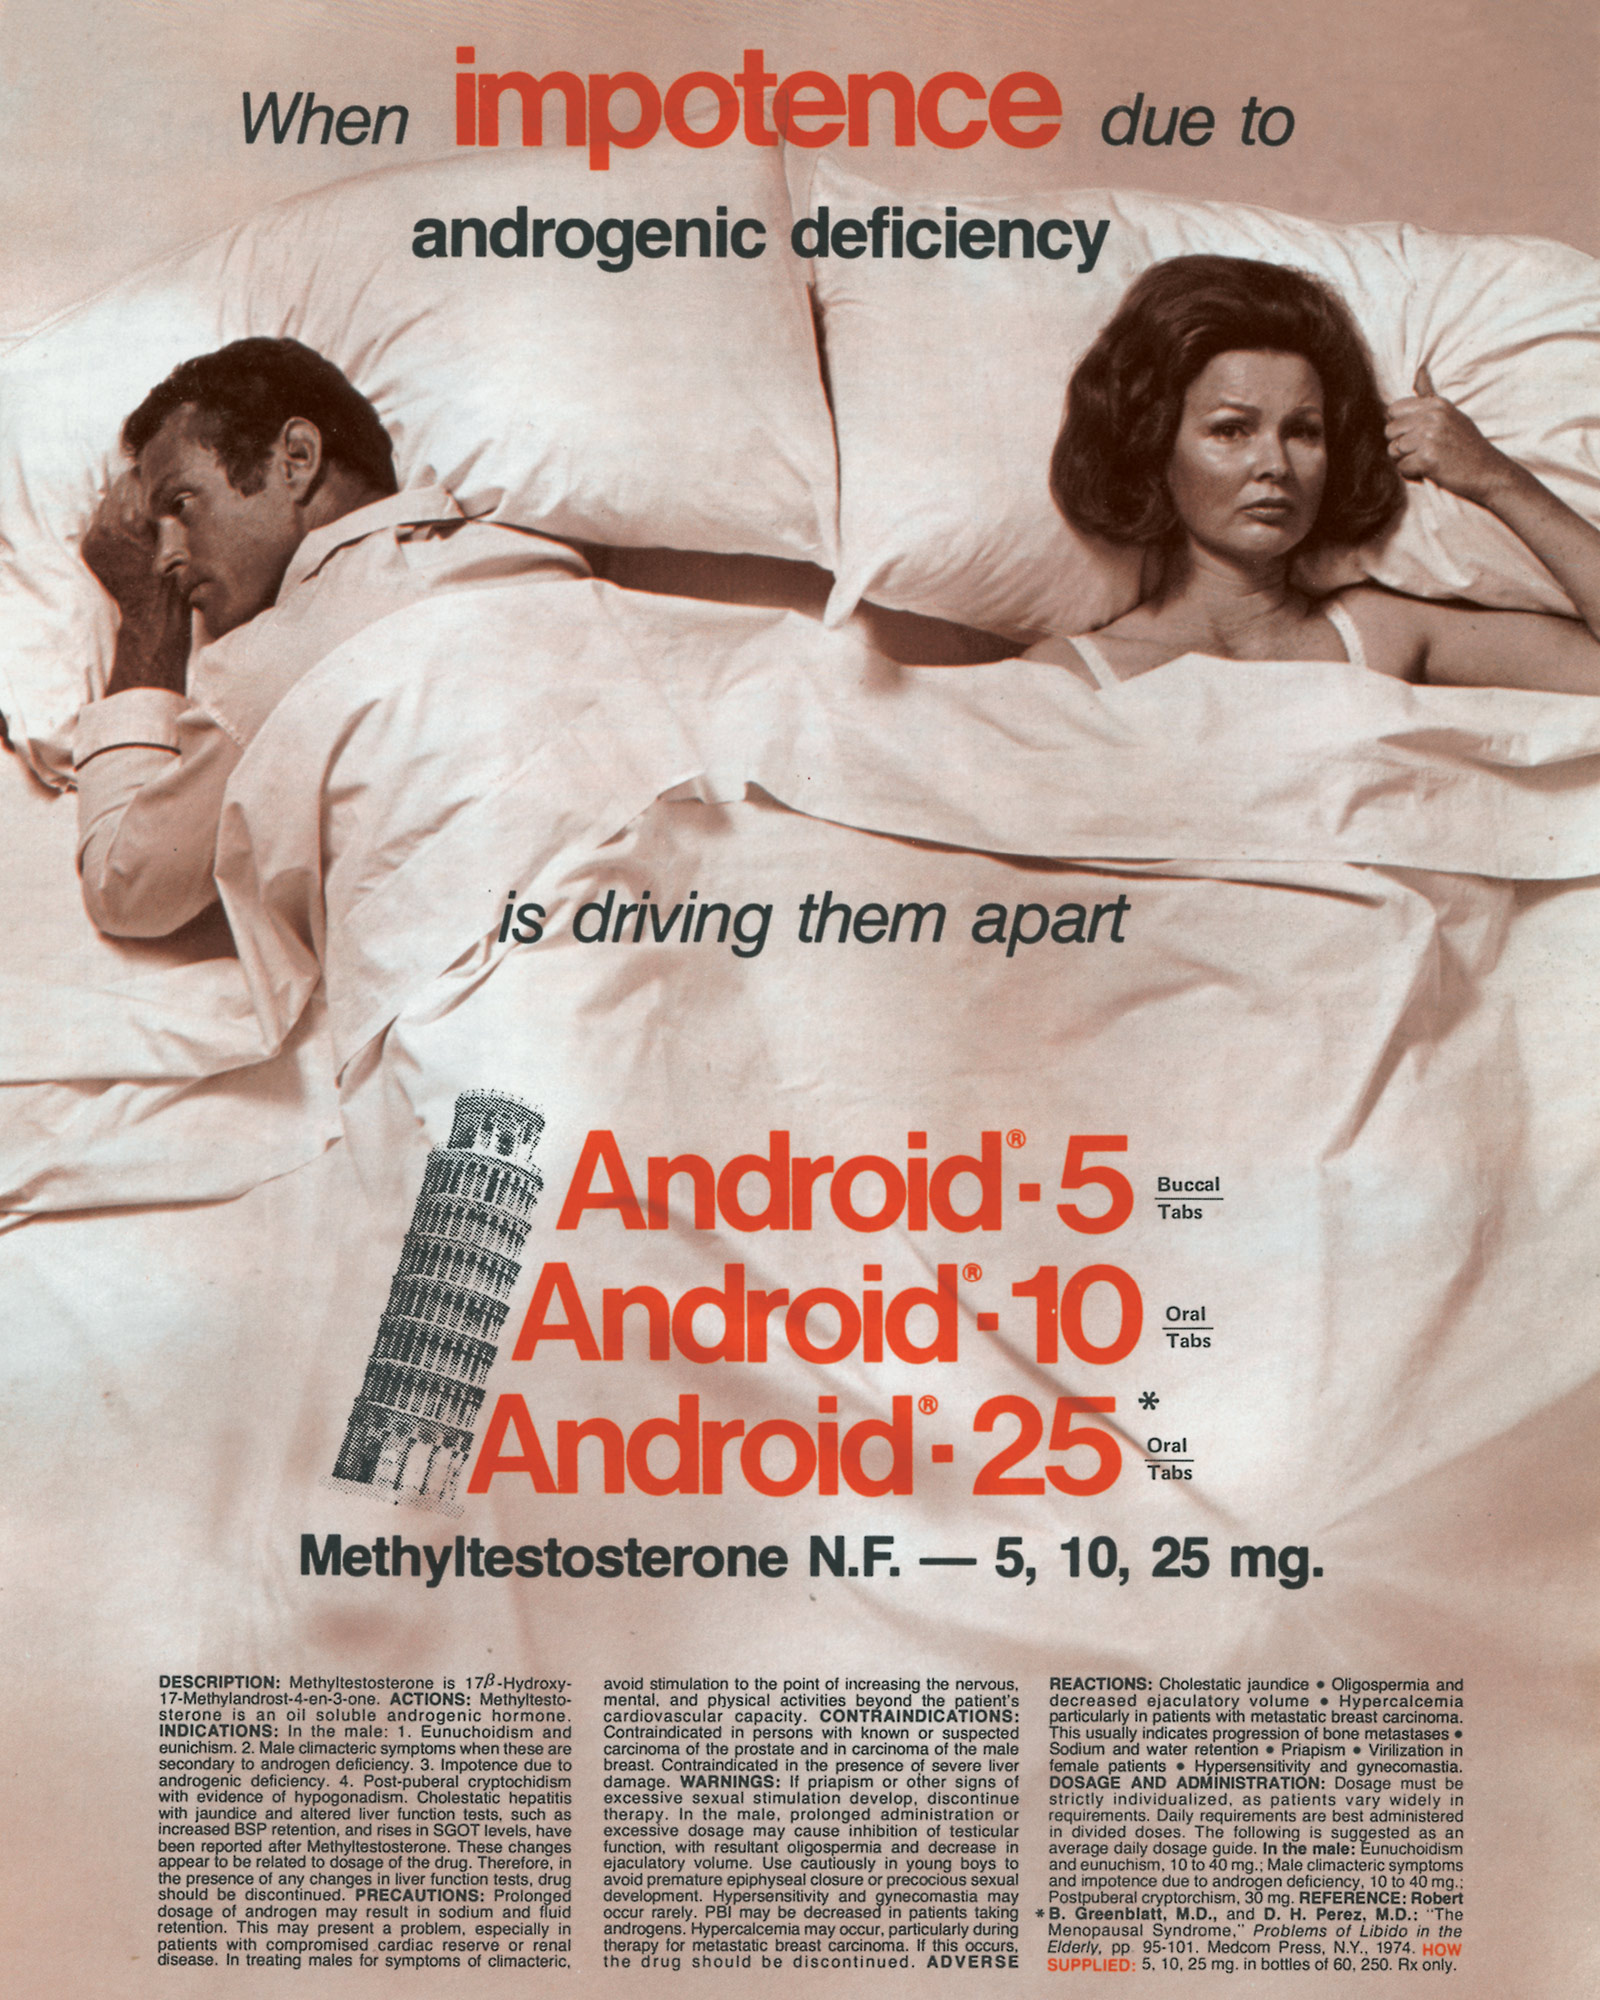 A nineteen seventy seven pharmaceutical advertisement for methyltestosterone depicting a crestfallen couple in bed with text that reads “When impotence due to androgenic deficiency is driving them apart.”